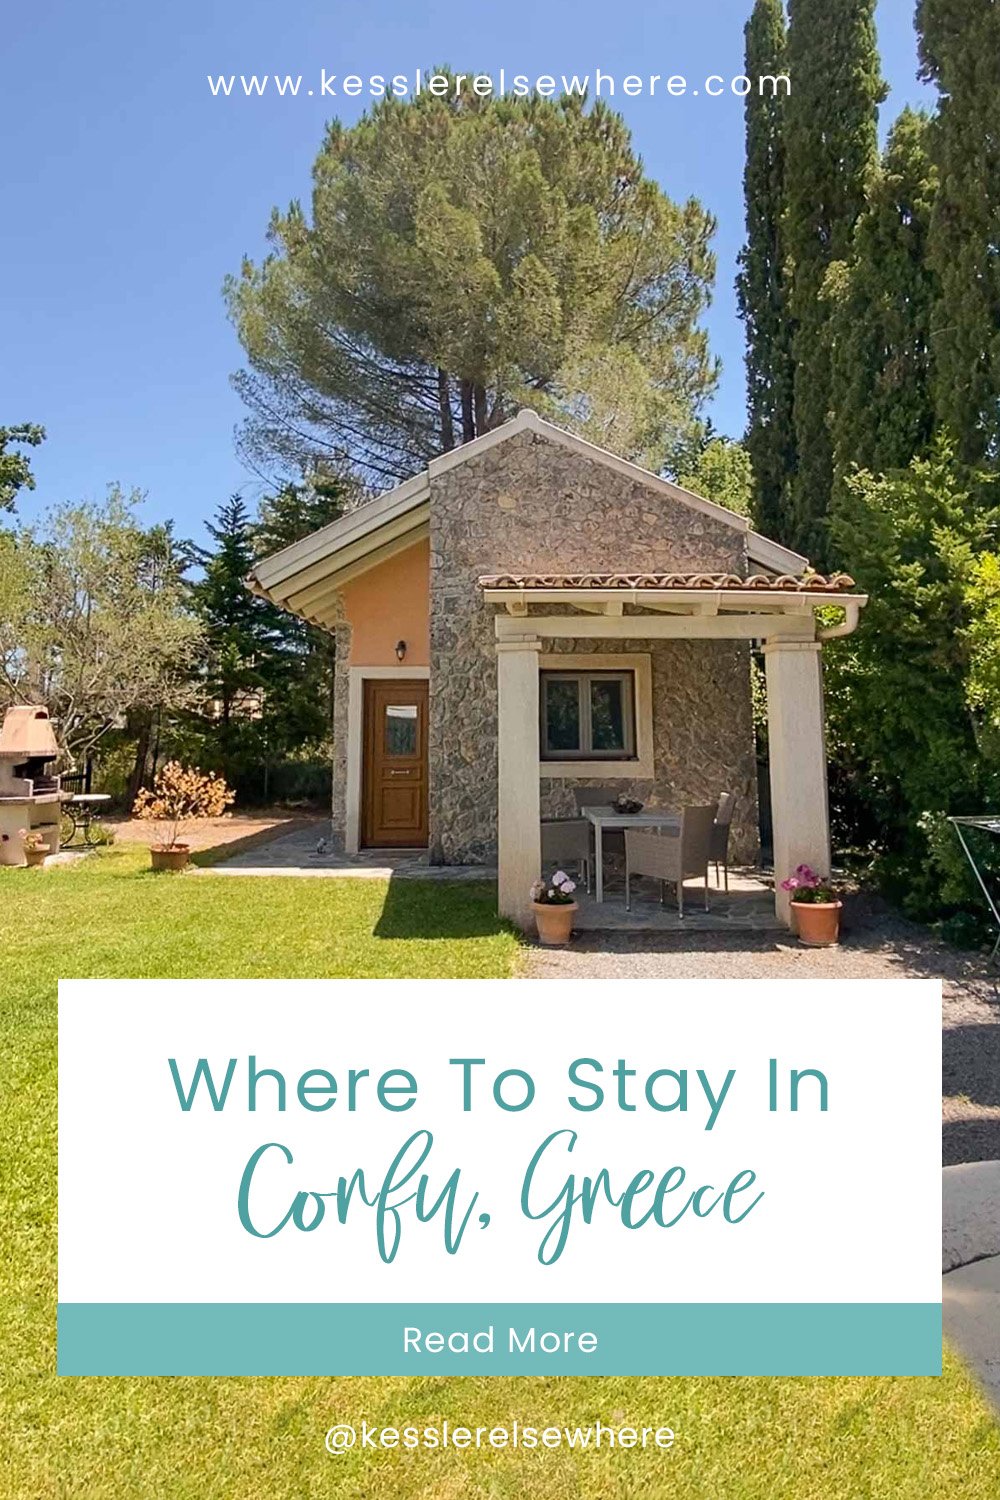 Where To Stay In Corfu, Greece